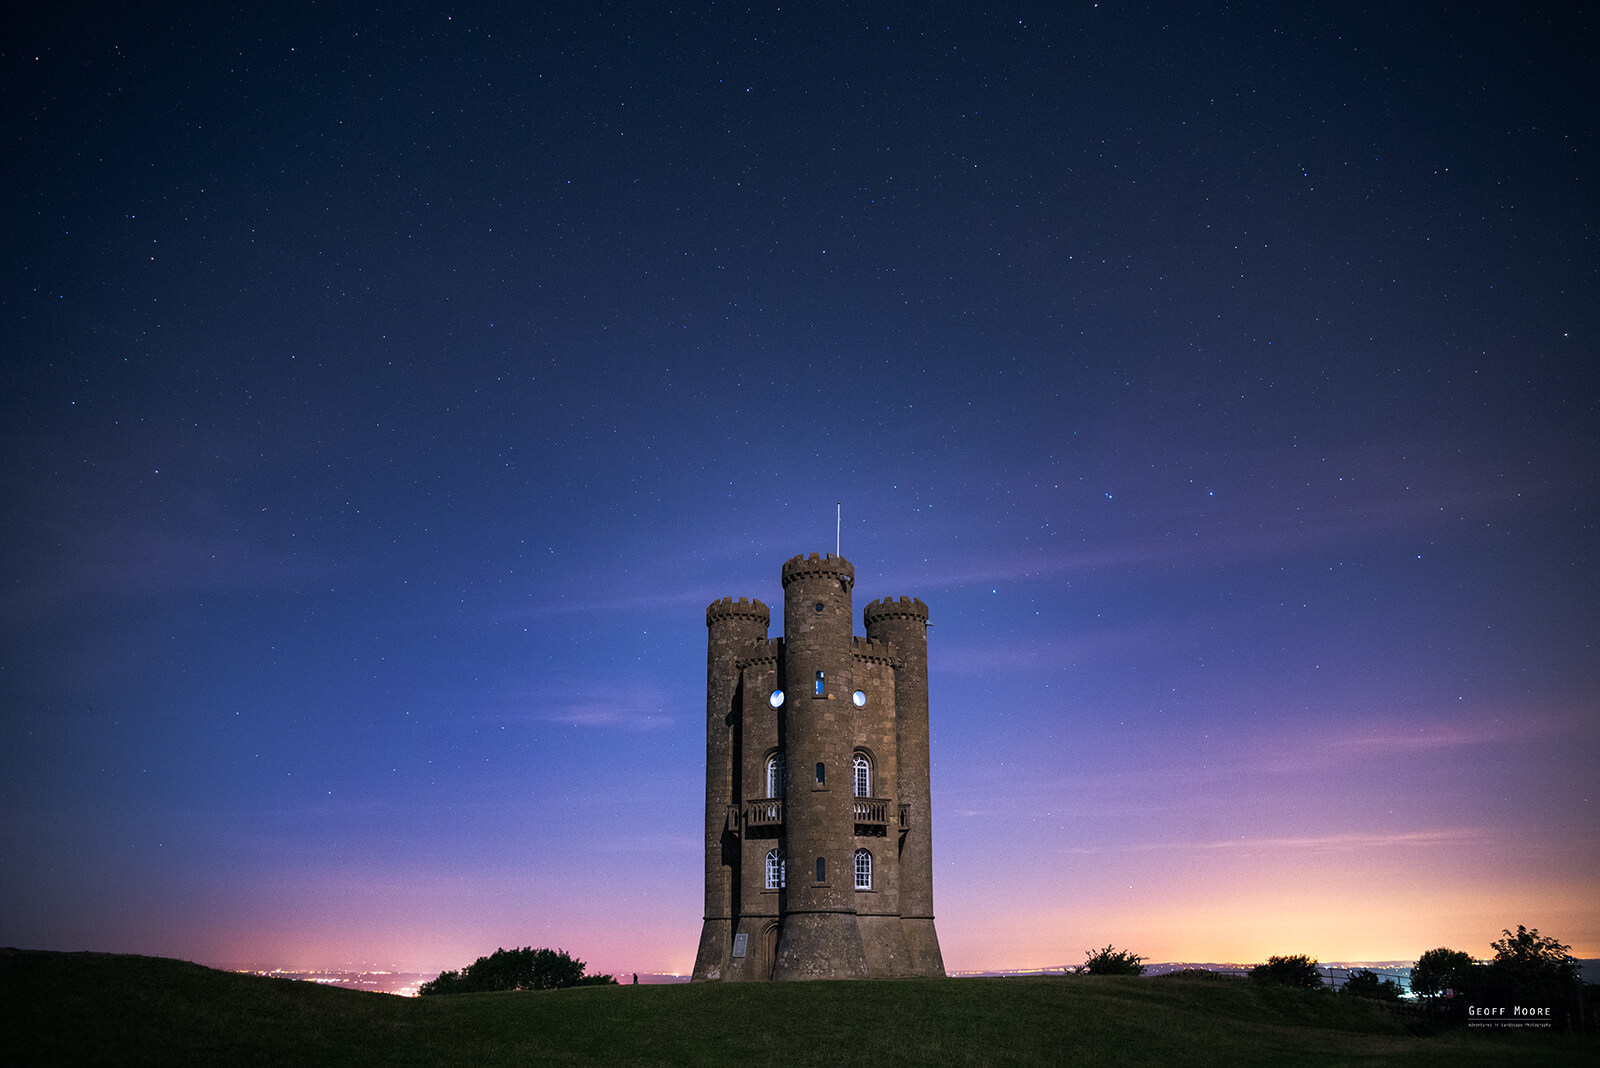 Broadway Tower & The Perseid Meteor Shower